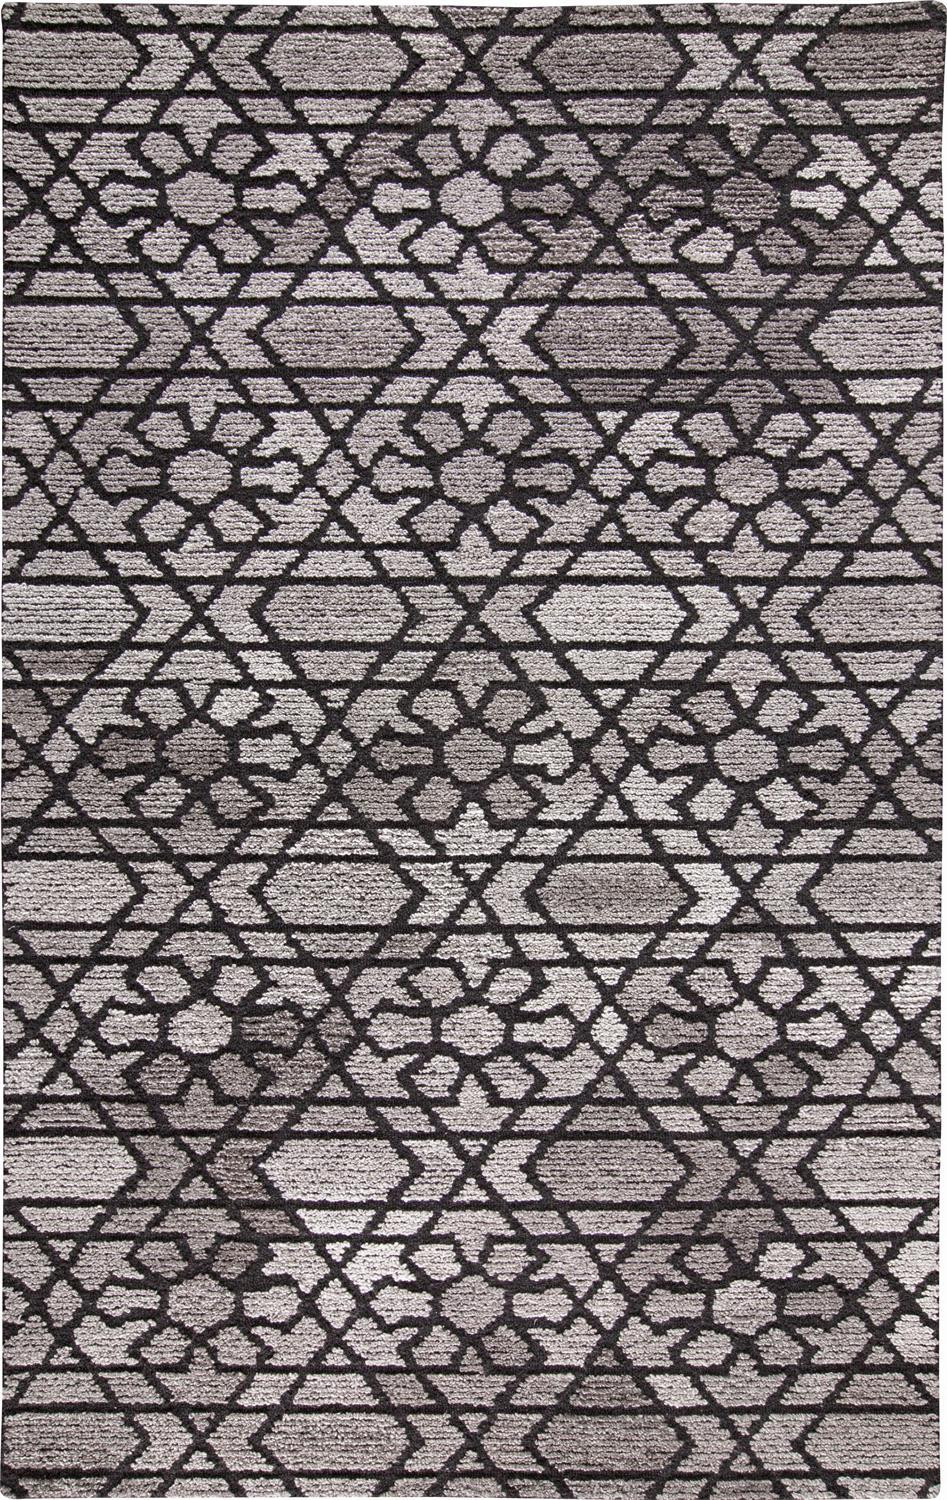 5' X 8' Taupe Black And Gray Wool Paisley Tufted Handmade Area Rug-512005-1